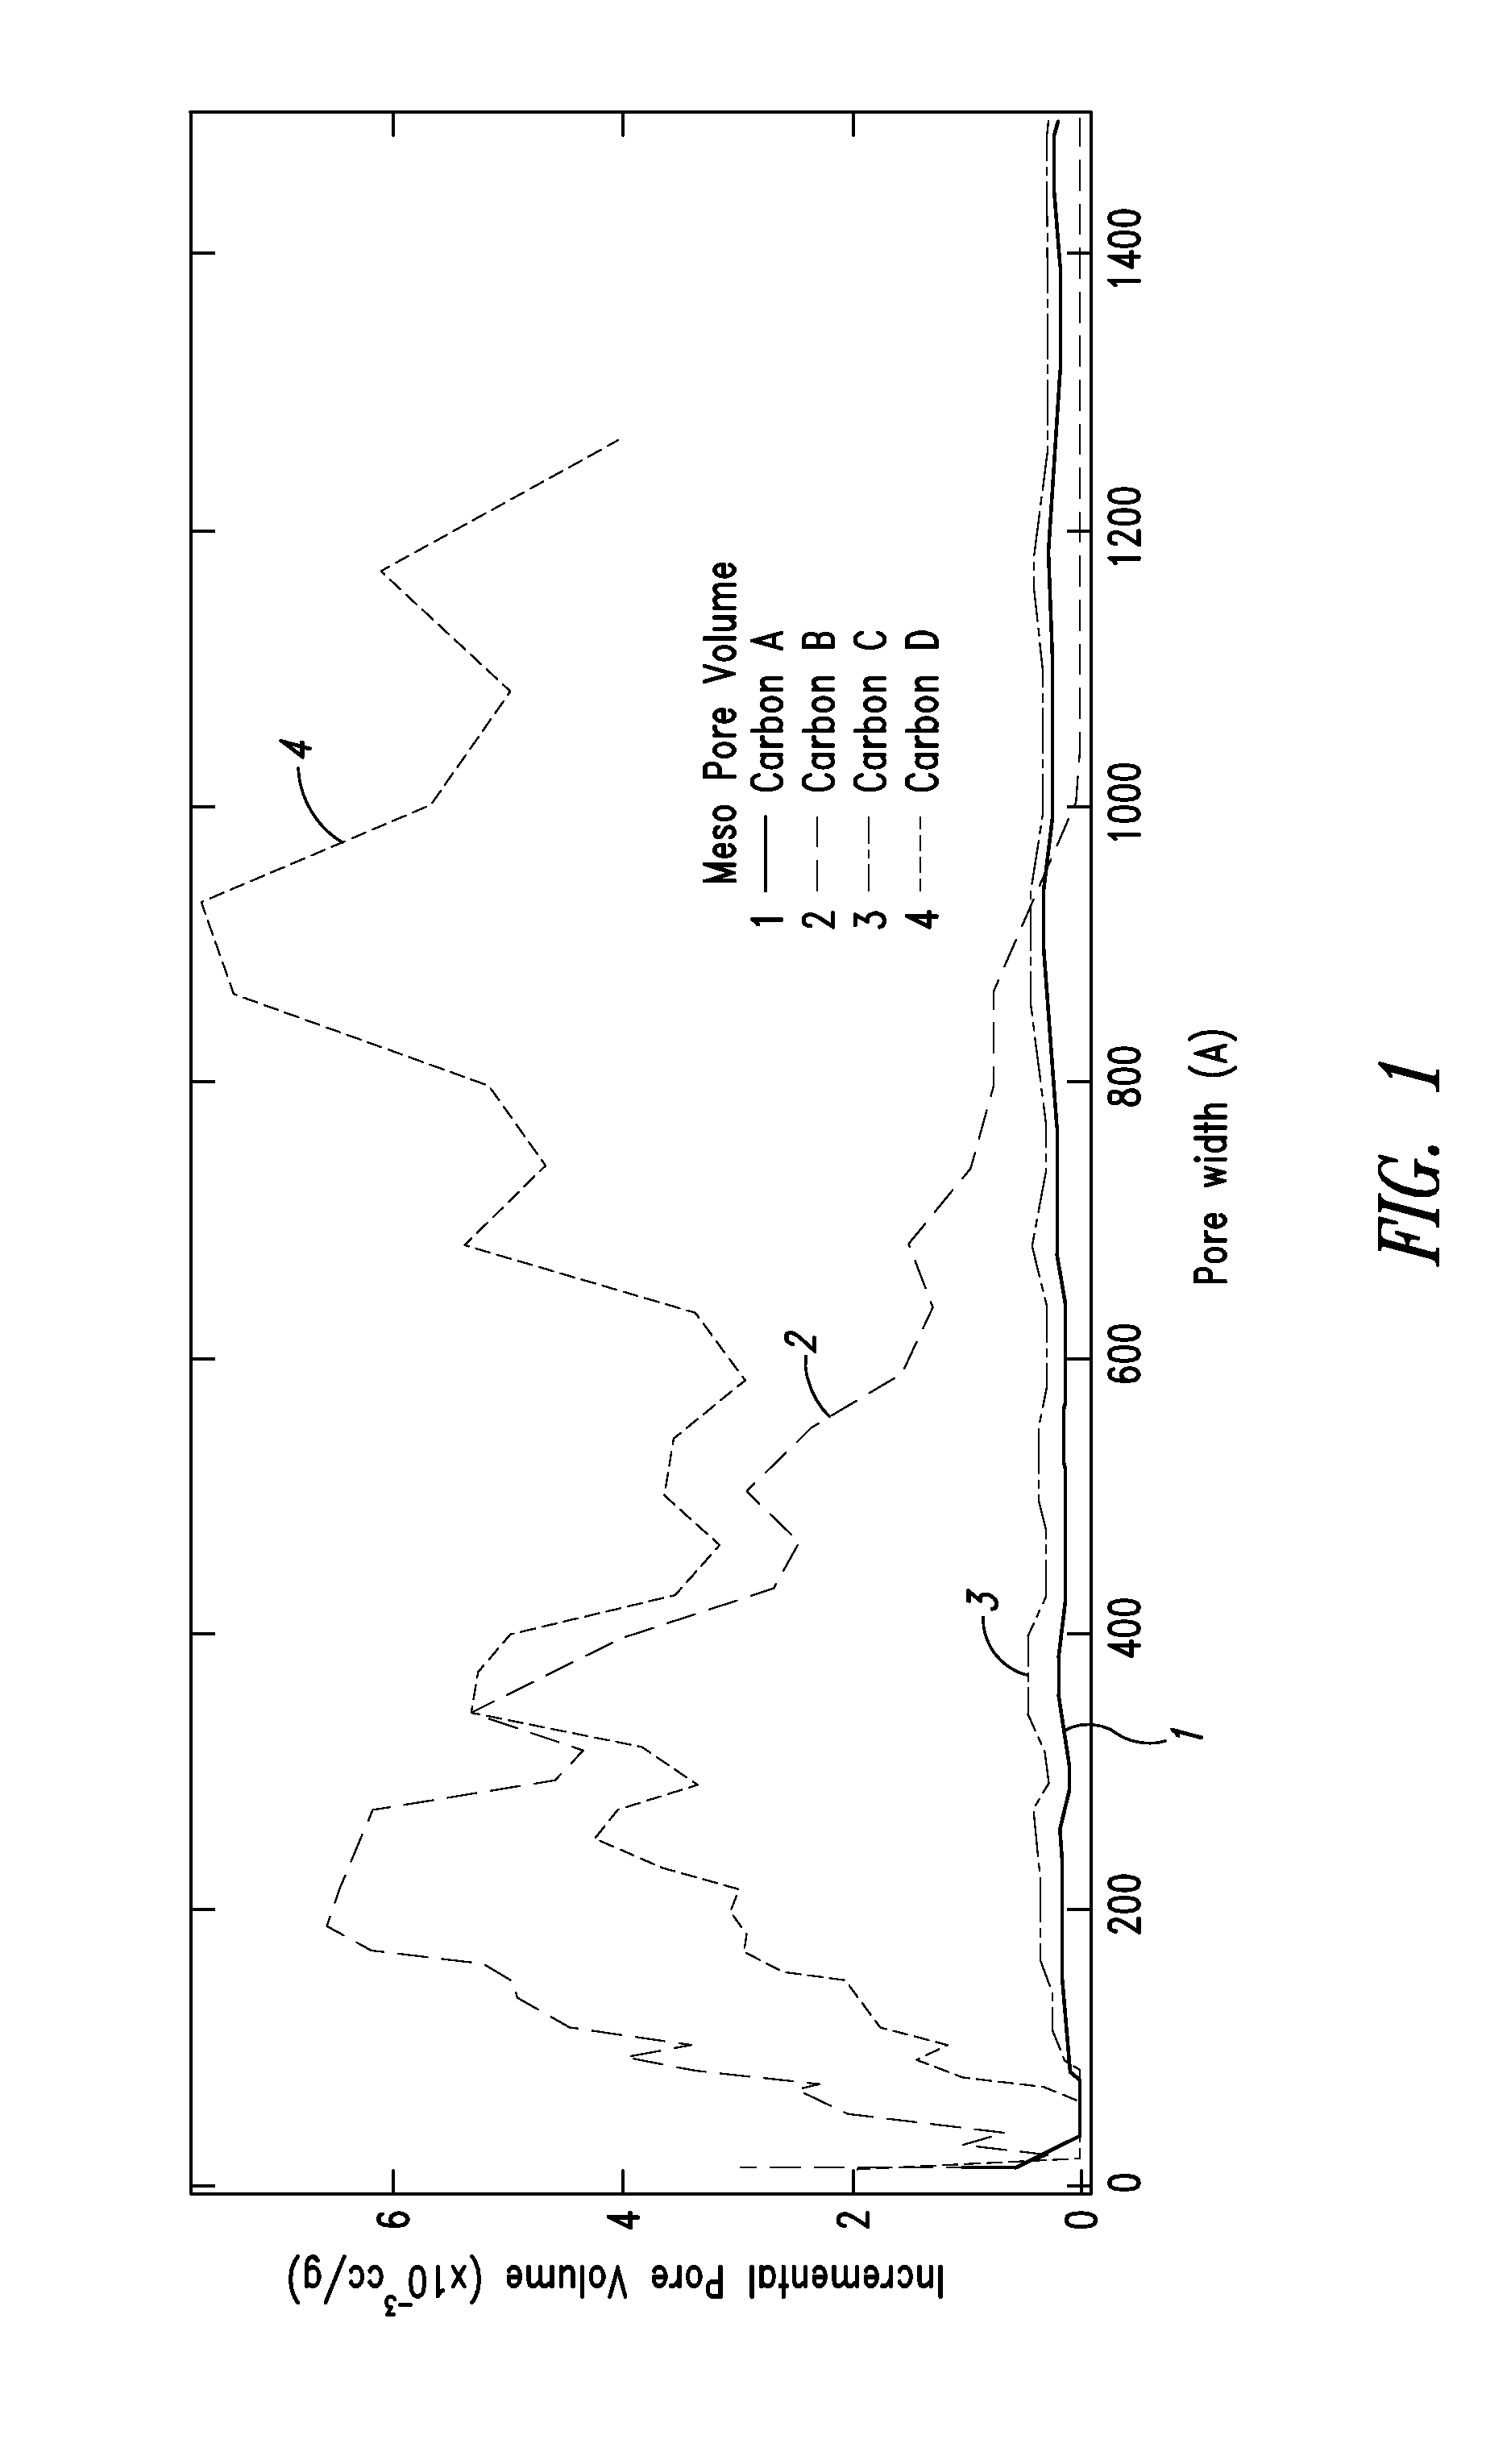 Composite carbon materials comprising lithium alloying electrochemical modifiers